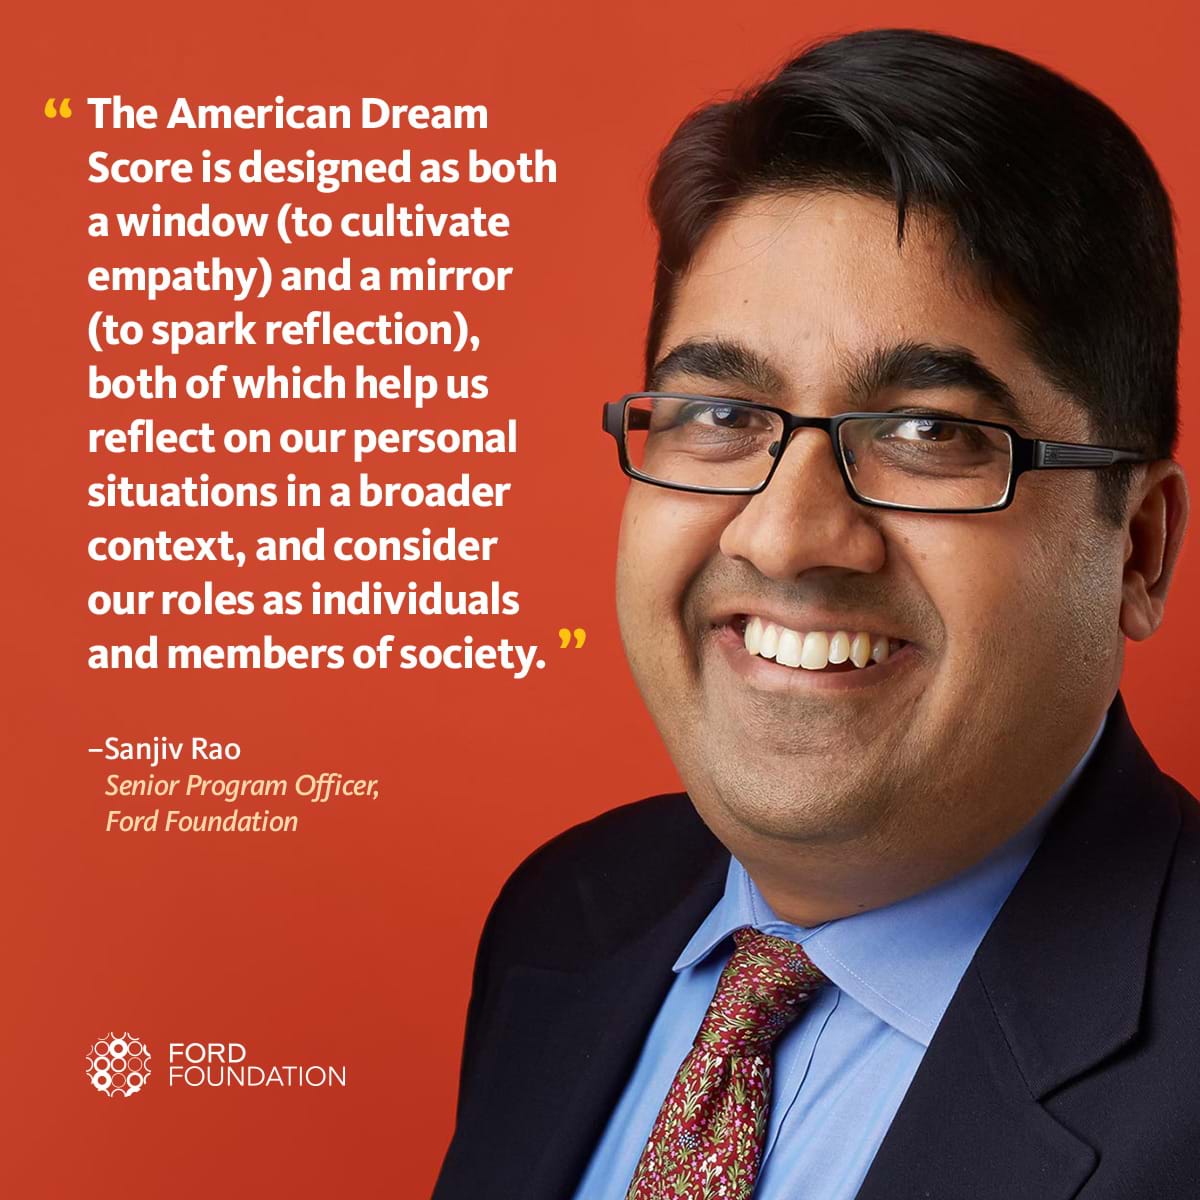 Photo of Sanjiv Rao with a quote about his American Dream Score